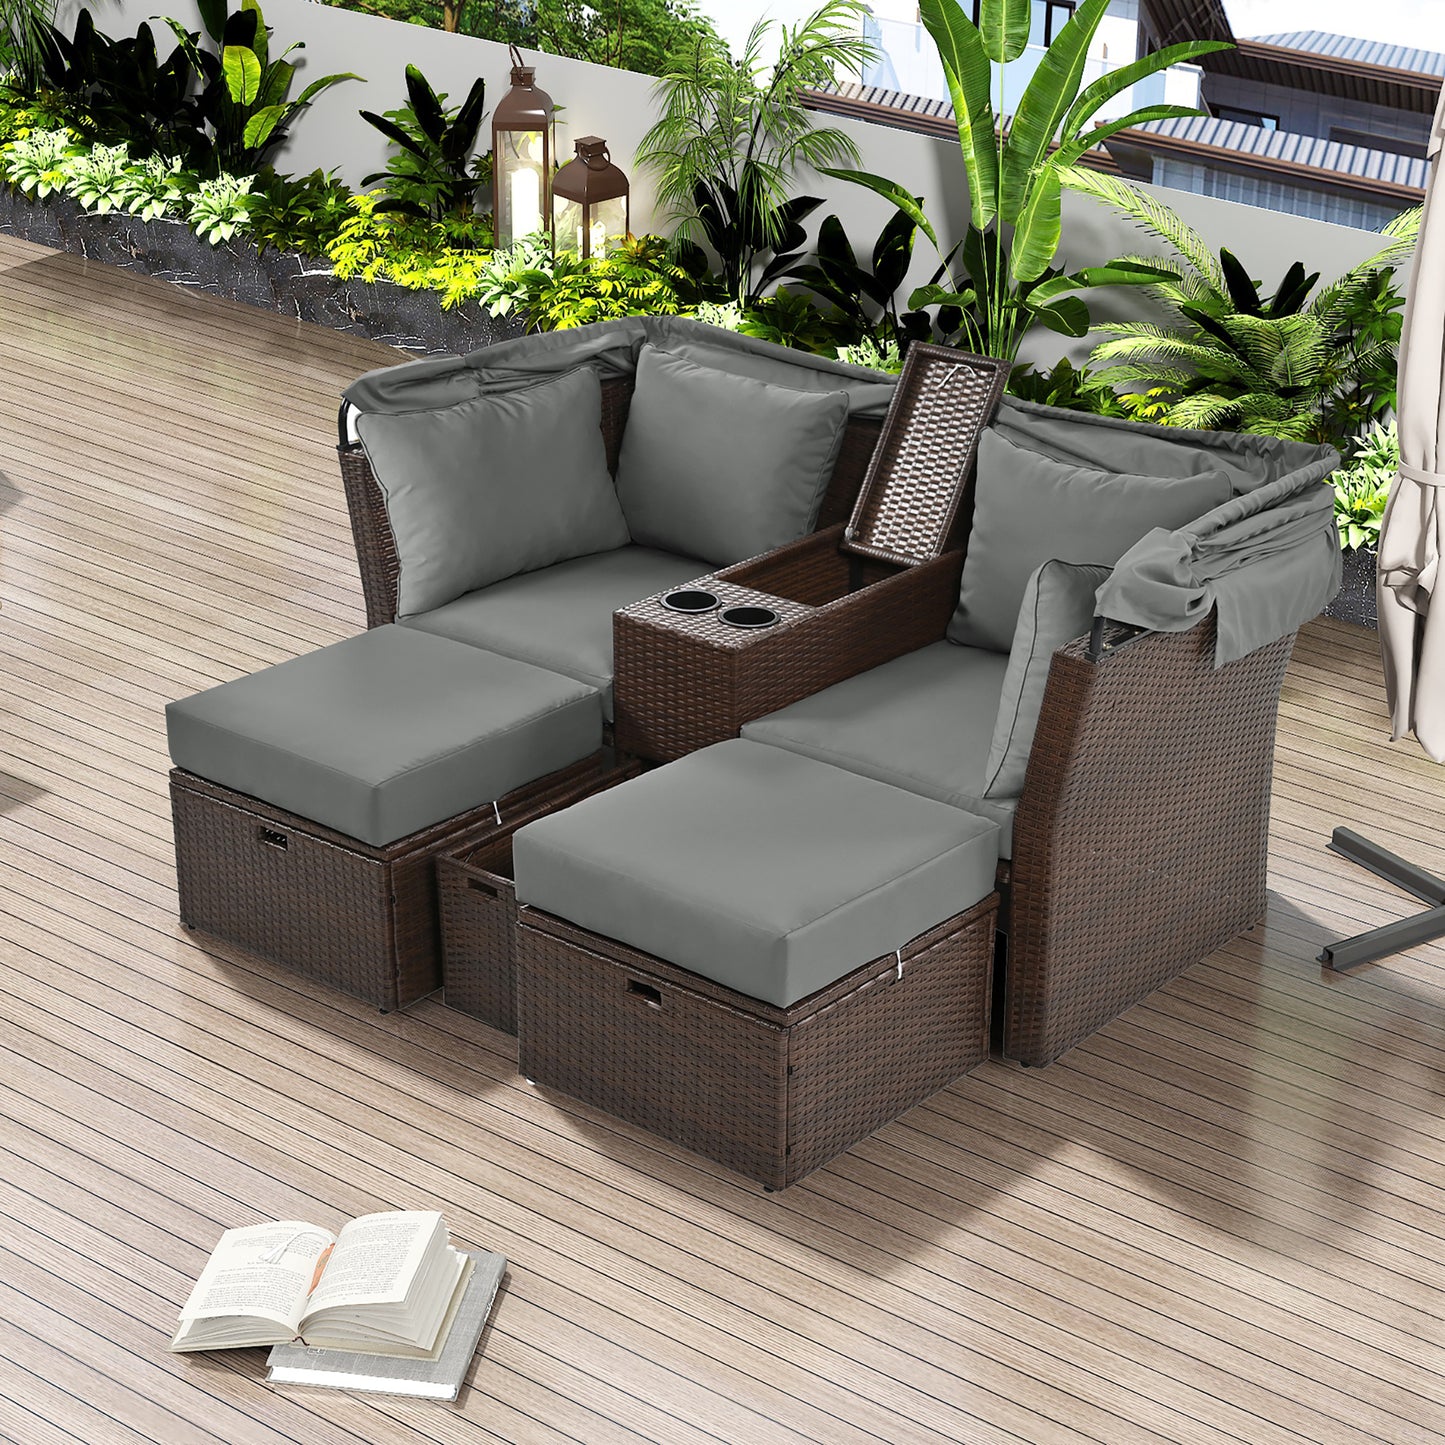 2-Seater Outdoor Patio Daybed Outdoor Double Daybed Outdoor Loveseat Sofa Set with Foldable Awning and Cushions for Garden, Balcony, Poolside